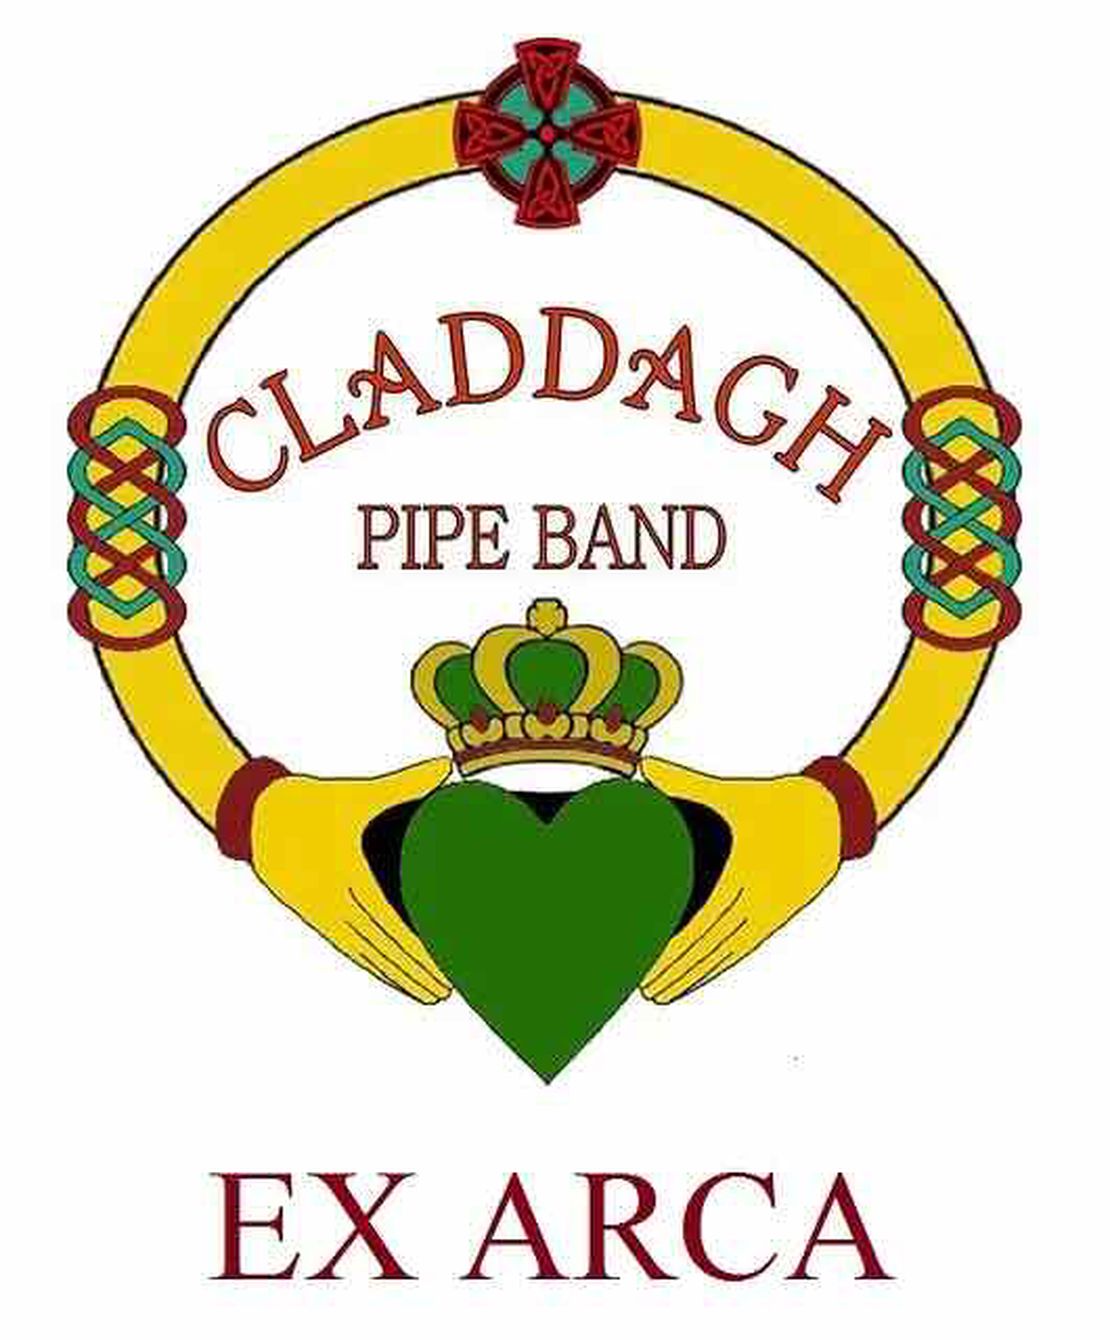 claddagh pipe band